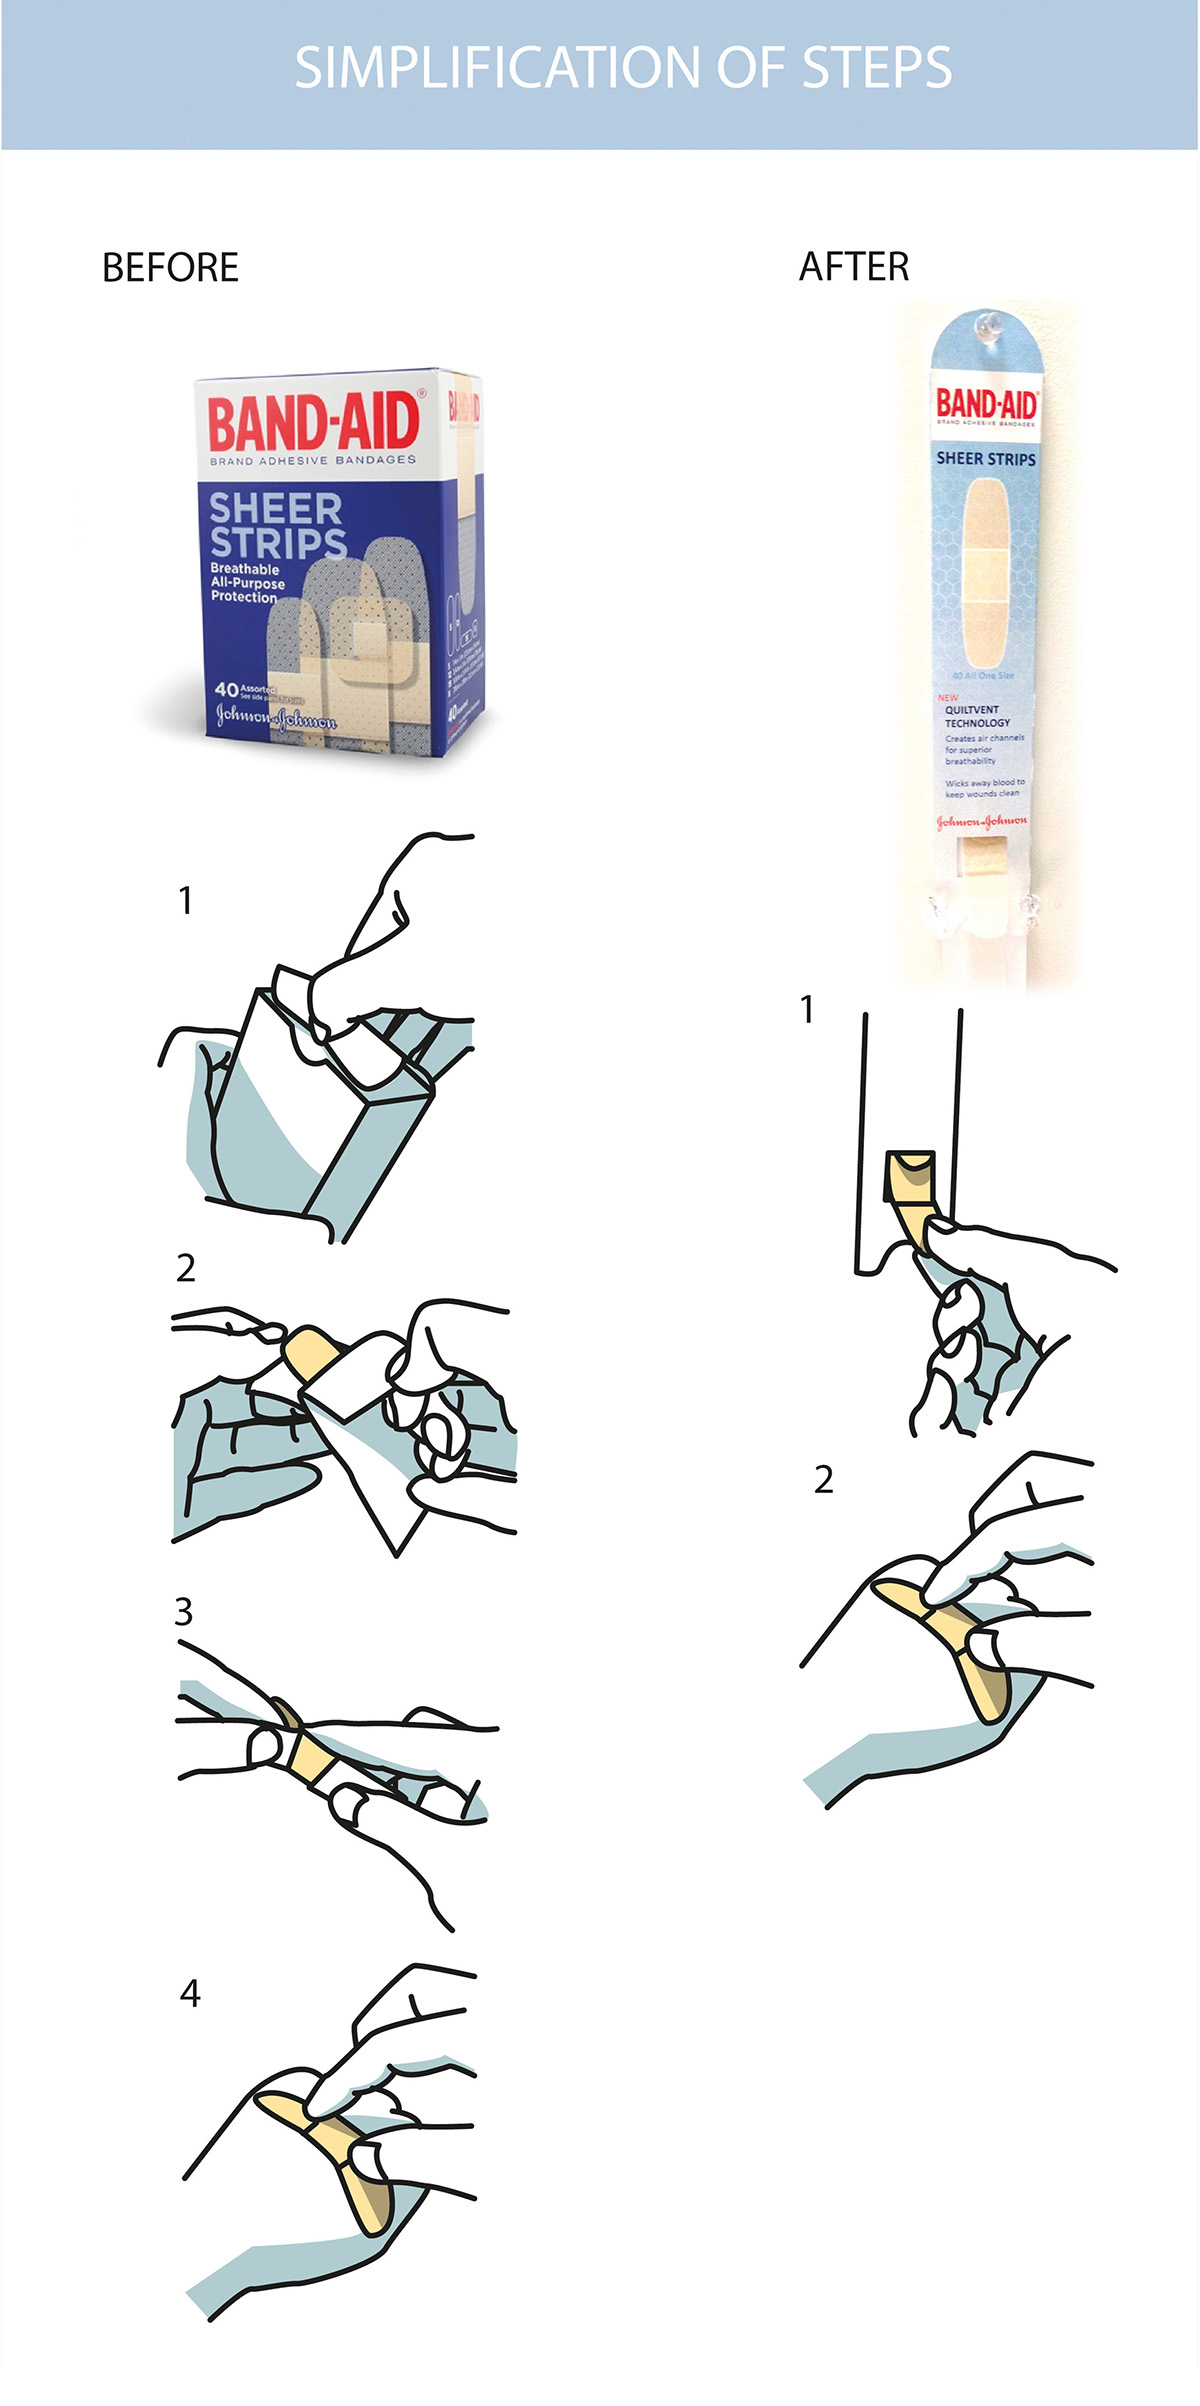 bandage dispenser package Band-Aid redesign